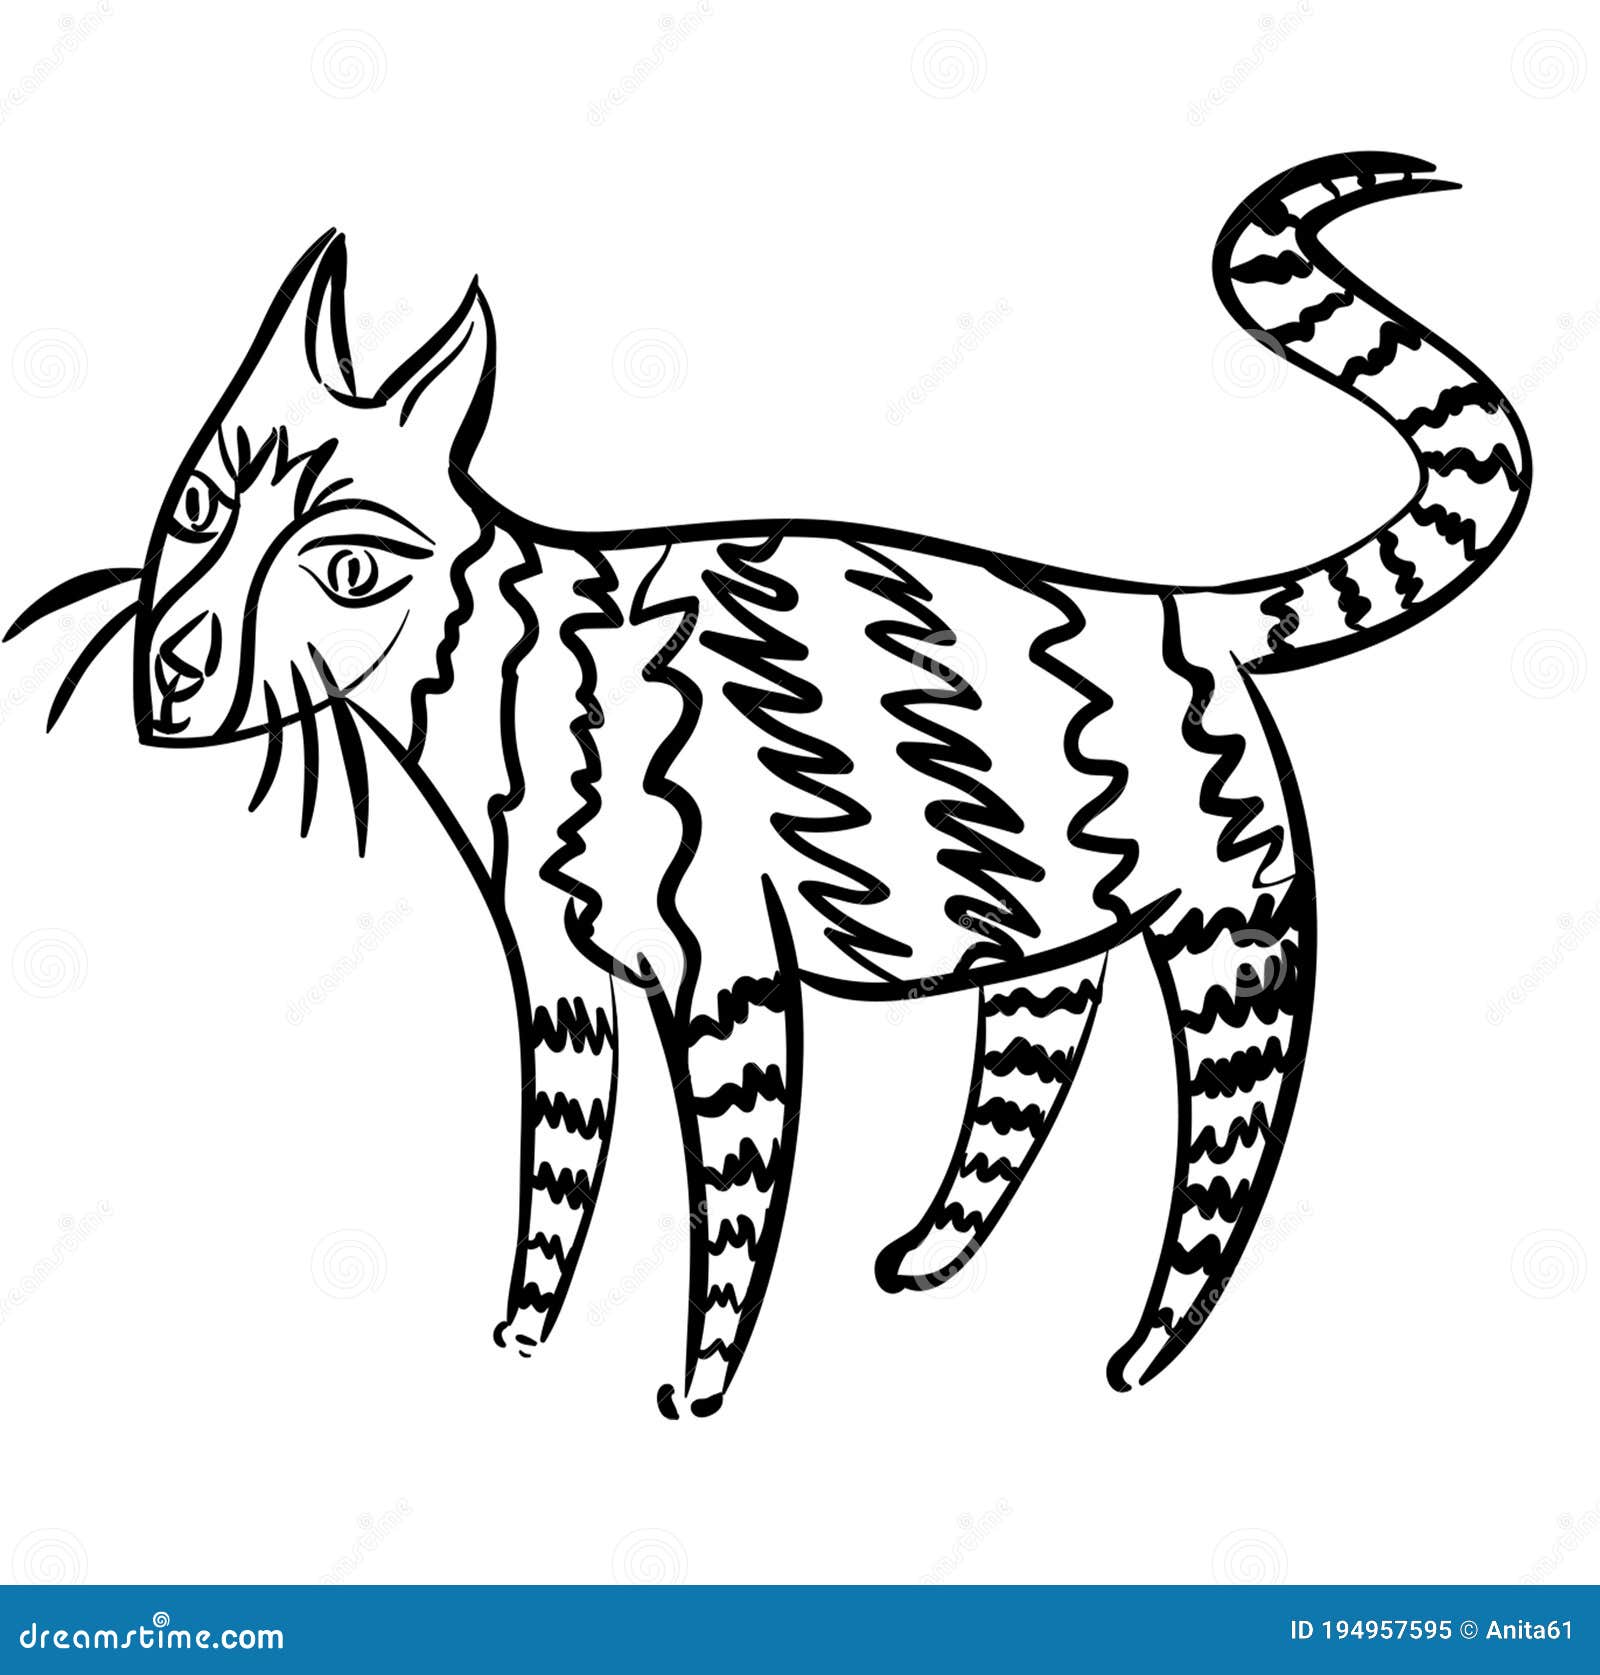 Funky striped cat stock vector. Illustration of drawn - 194957595